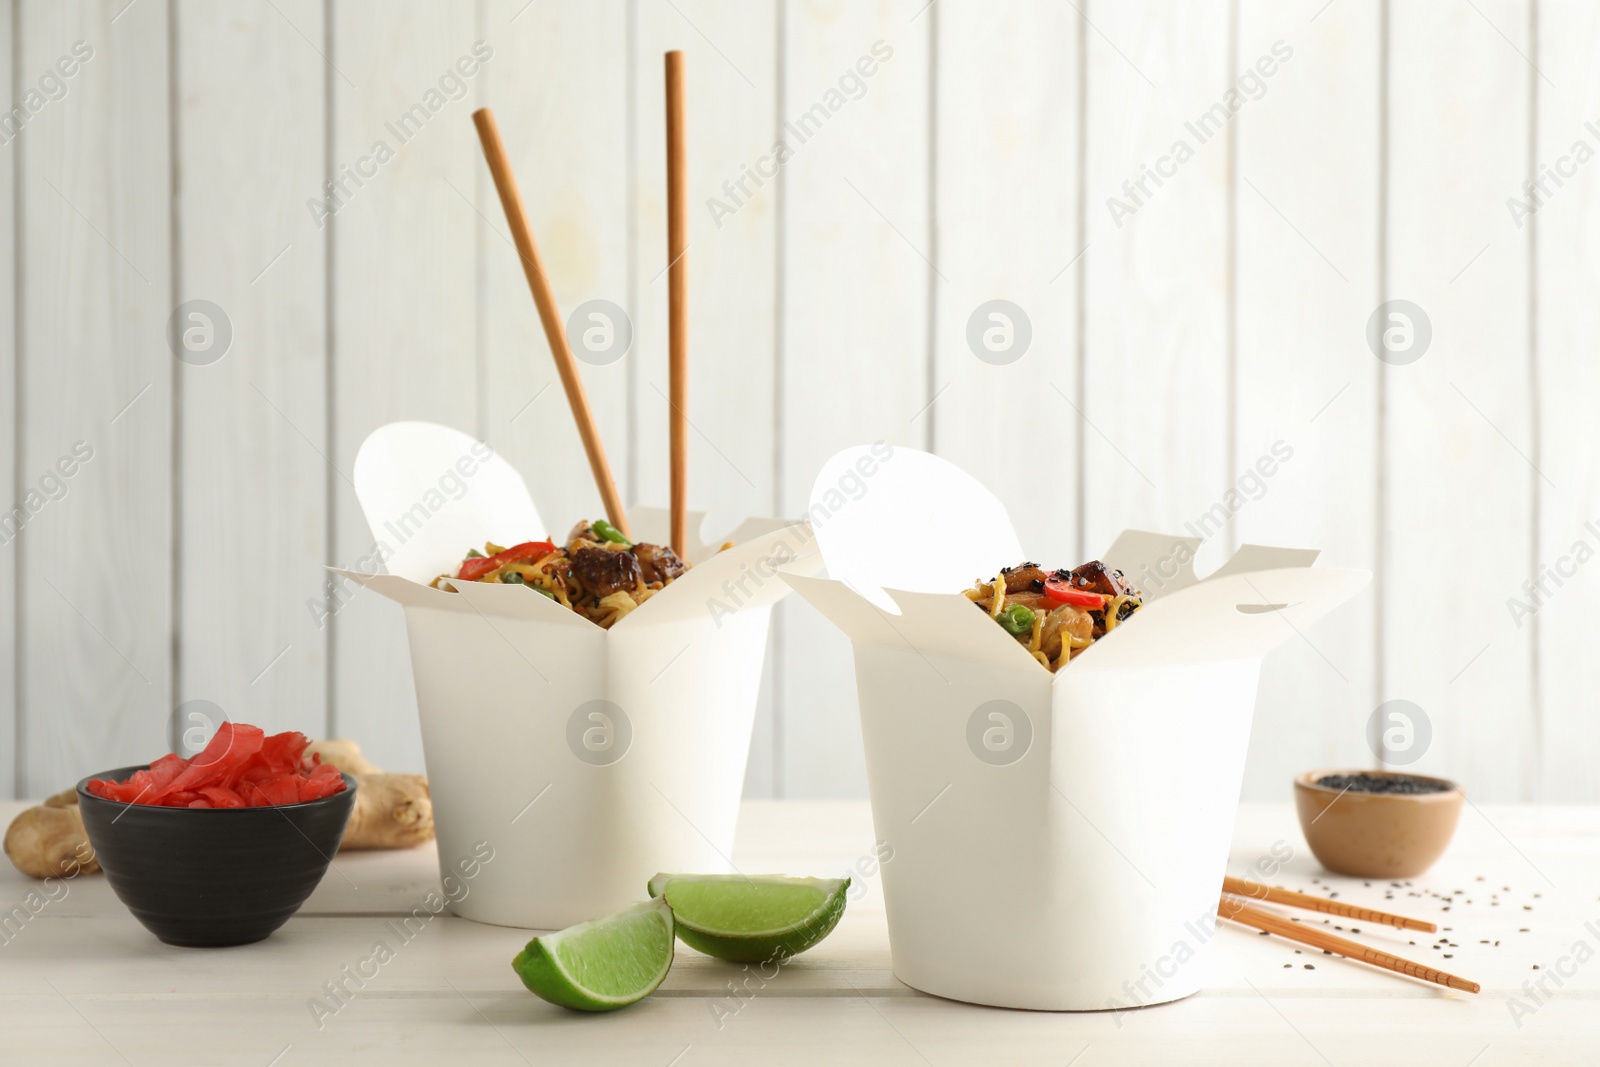 Photo of Boxes of wok noodles with vegetables, meat and chopsticks on white wooden table